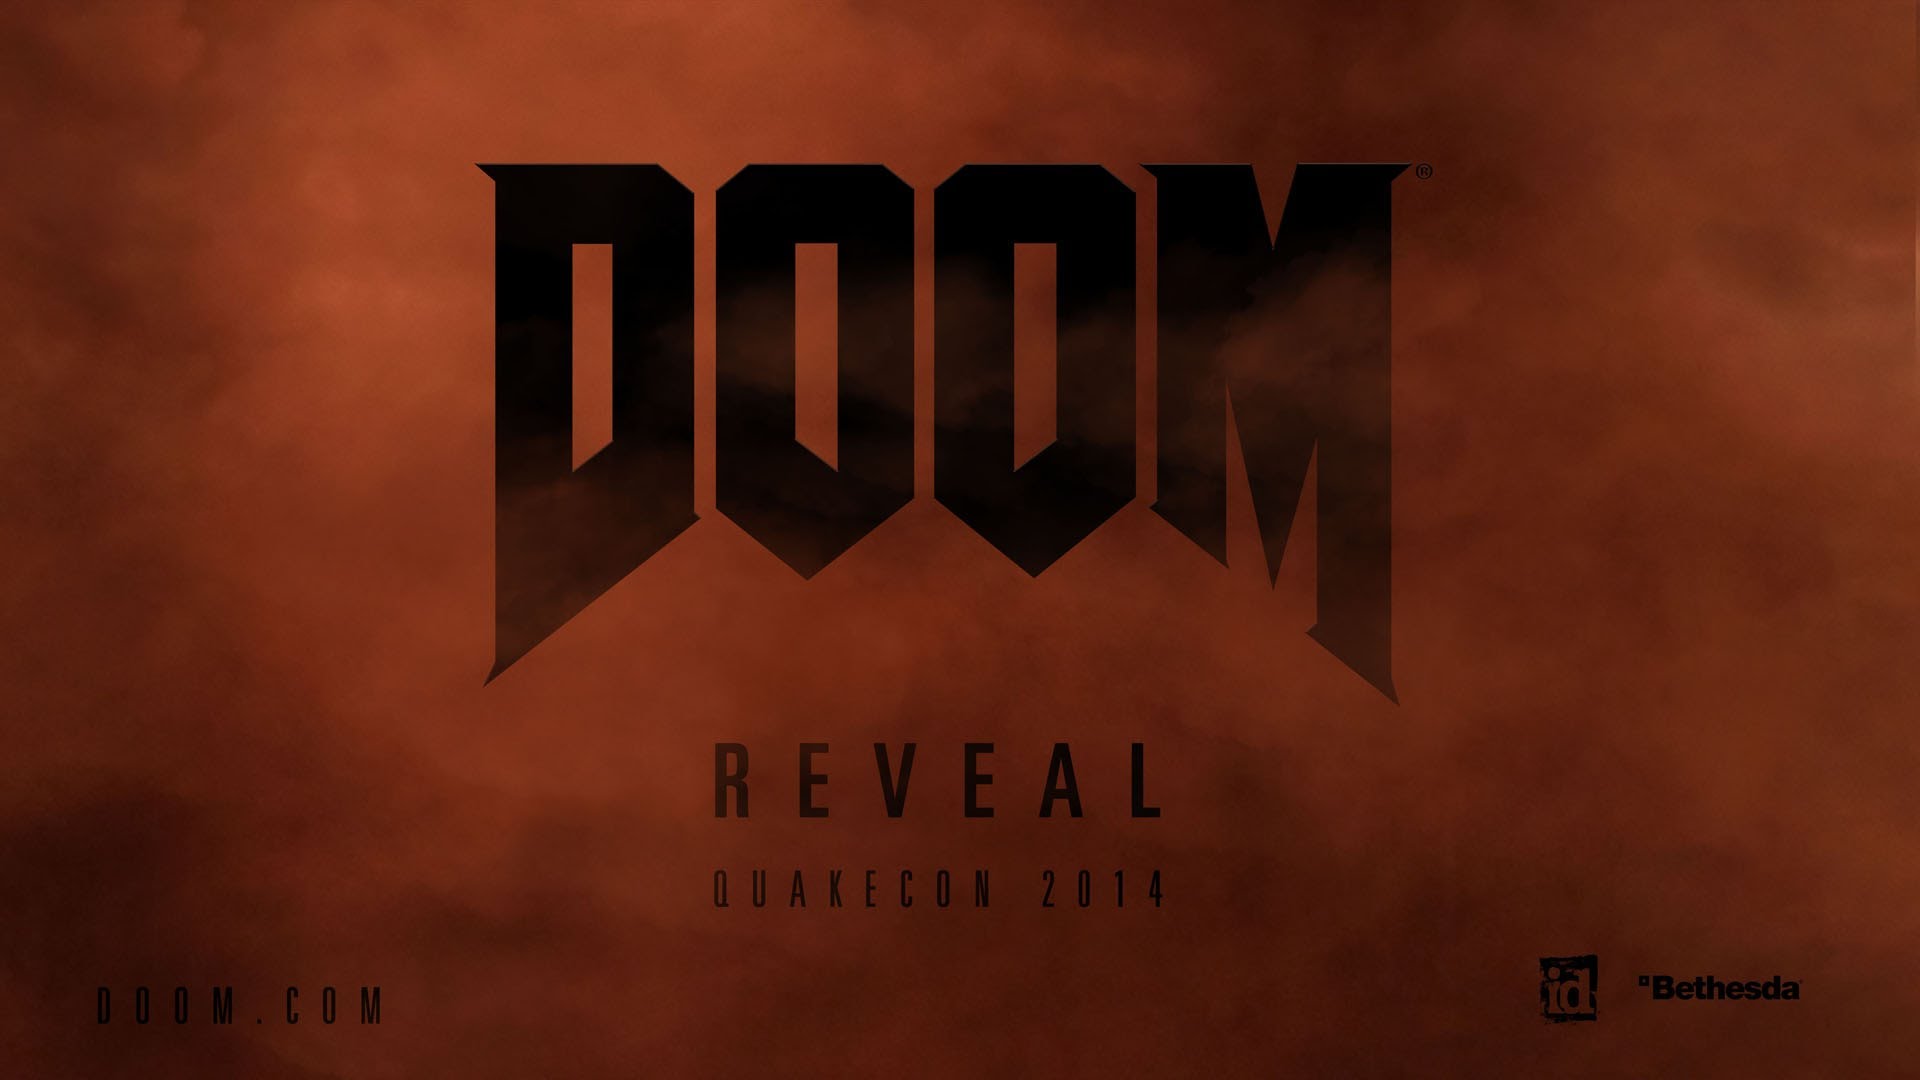 The new Doom teased at E3 is not Doom 4 but rather an entire series 1920x1080